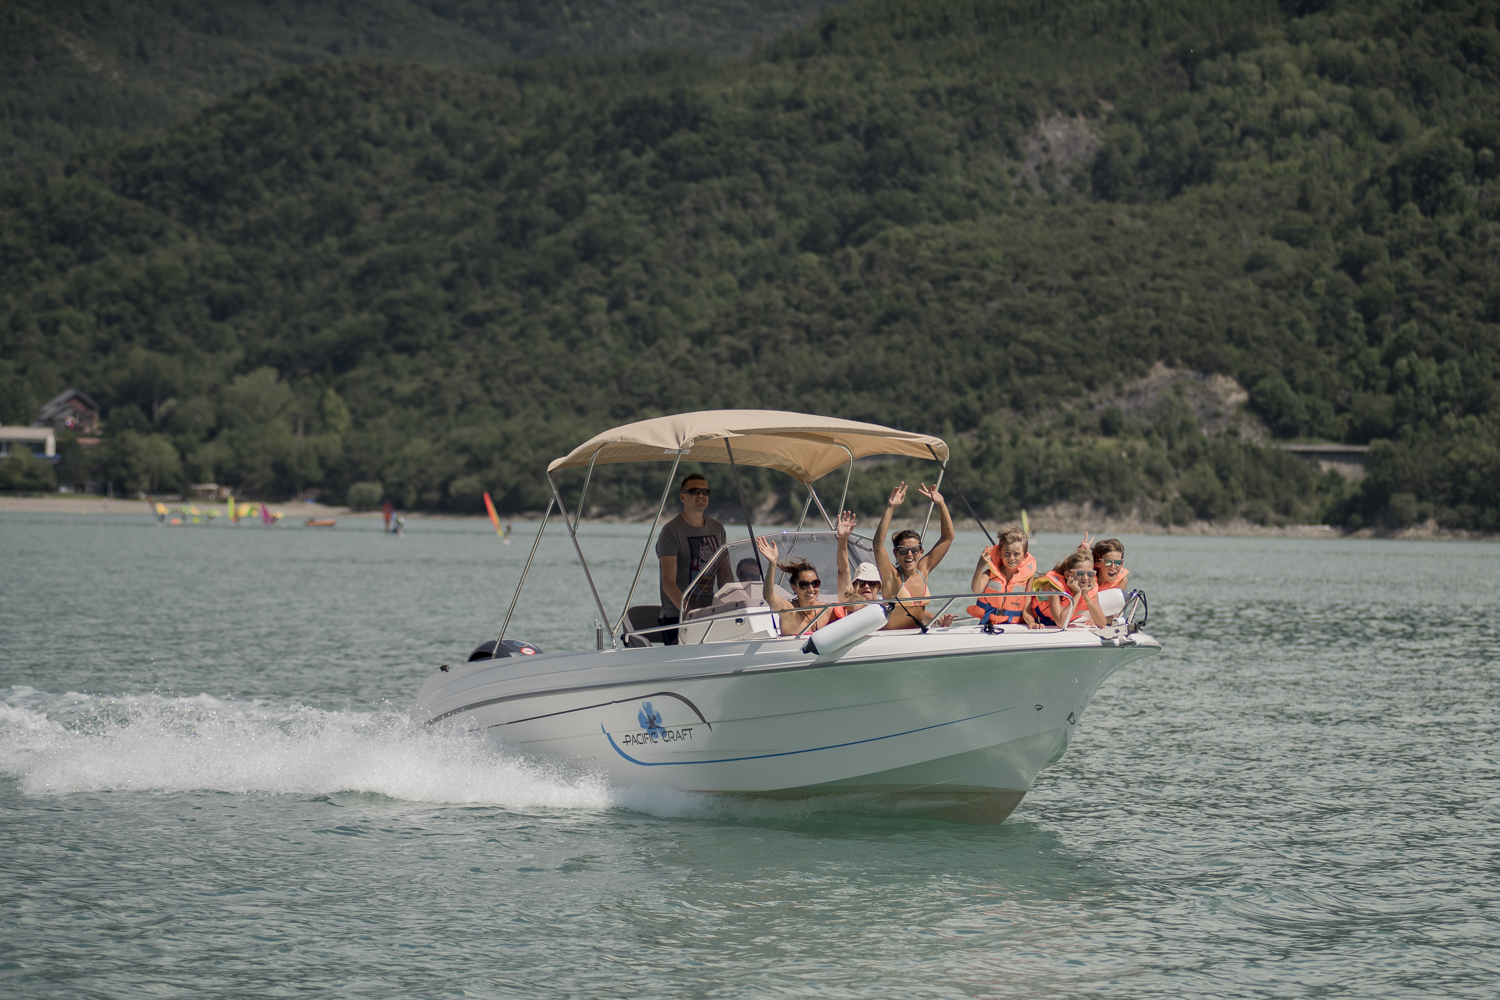 Aqua Détente Pros: Boat rental with or without license